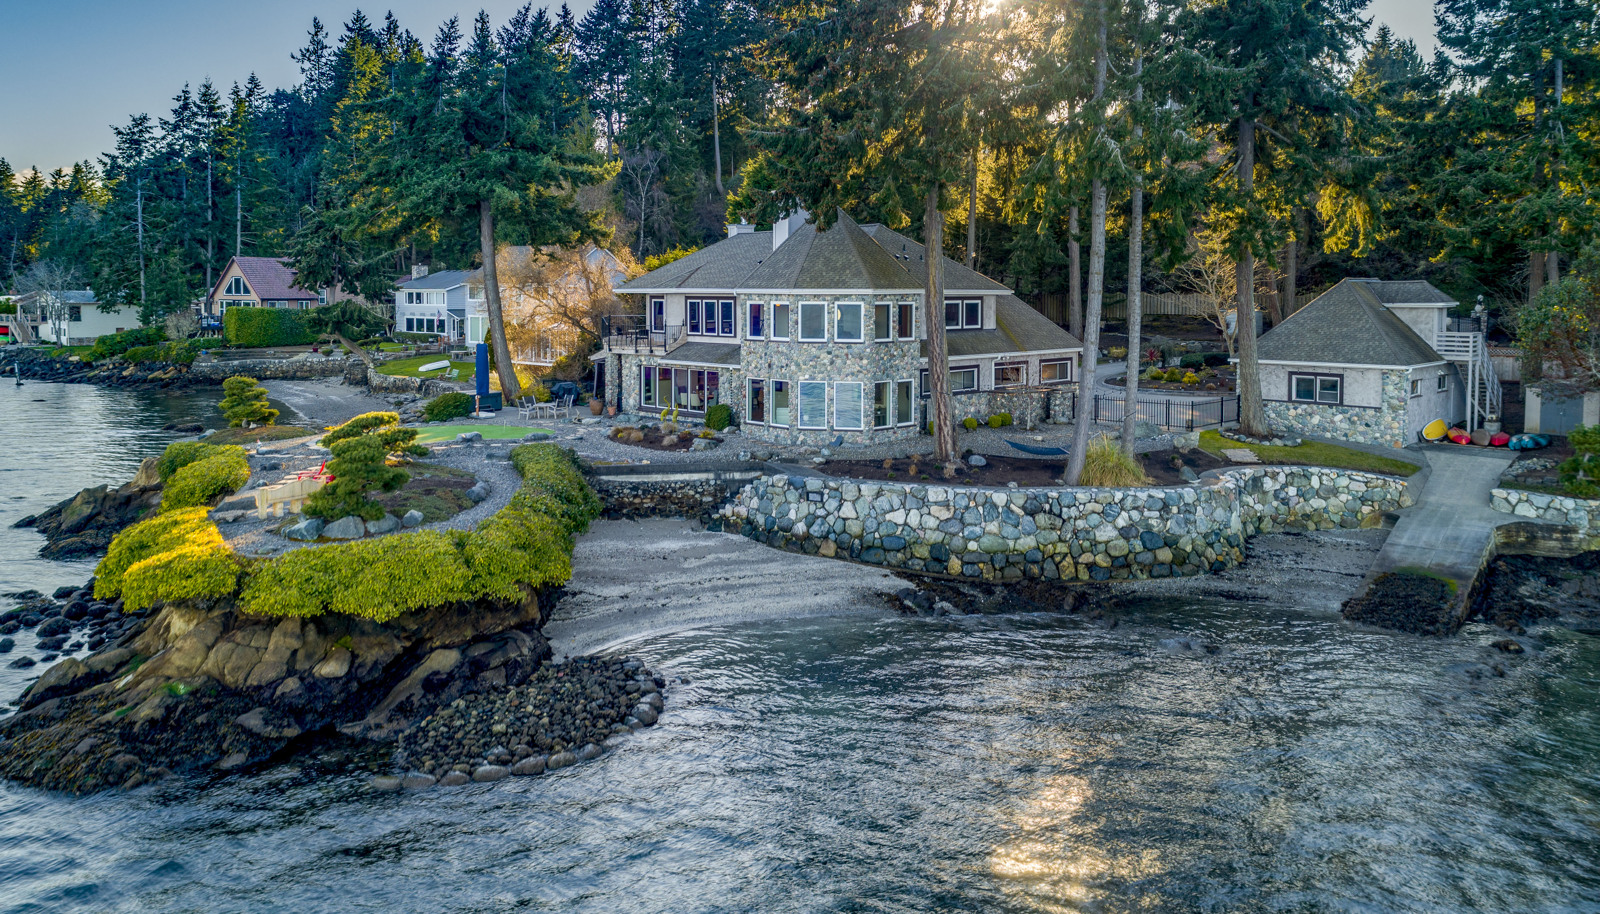 An idyllic waterfront lifestyle and setting with panoramic 240+ degree views, a sandy beach area, and a boat ramp!